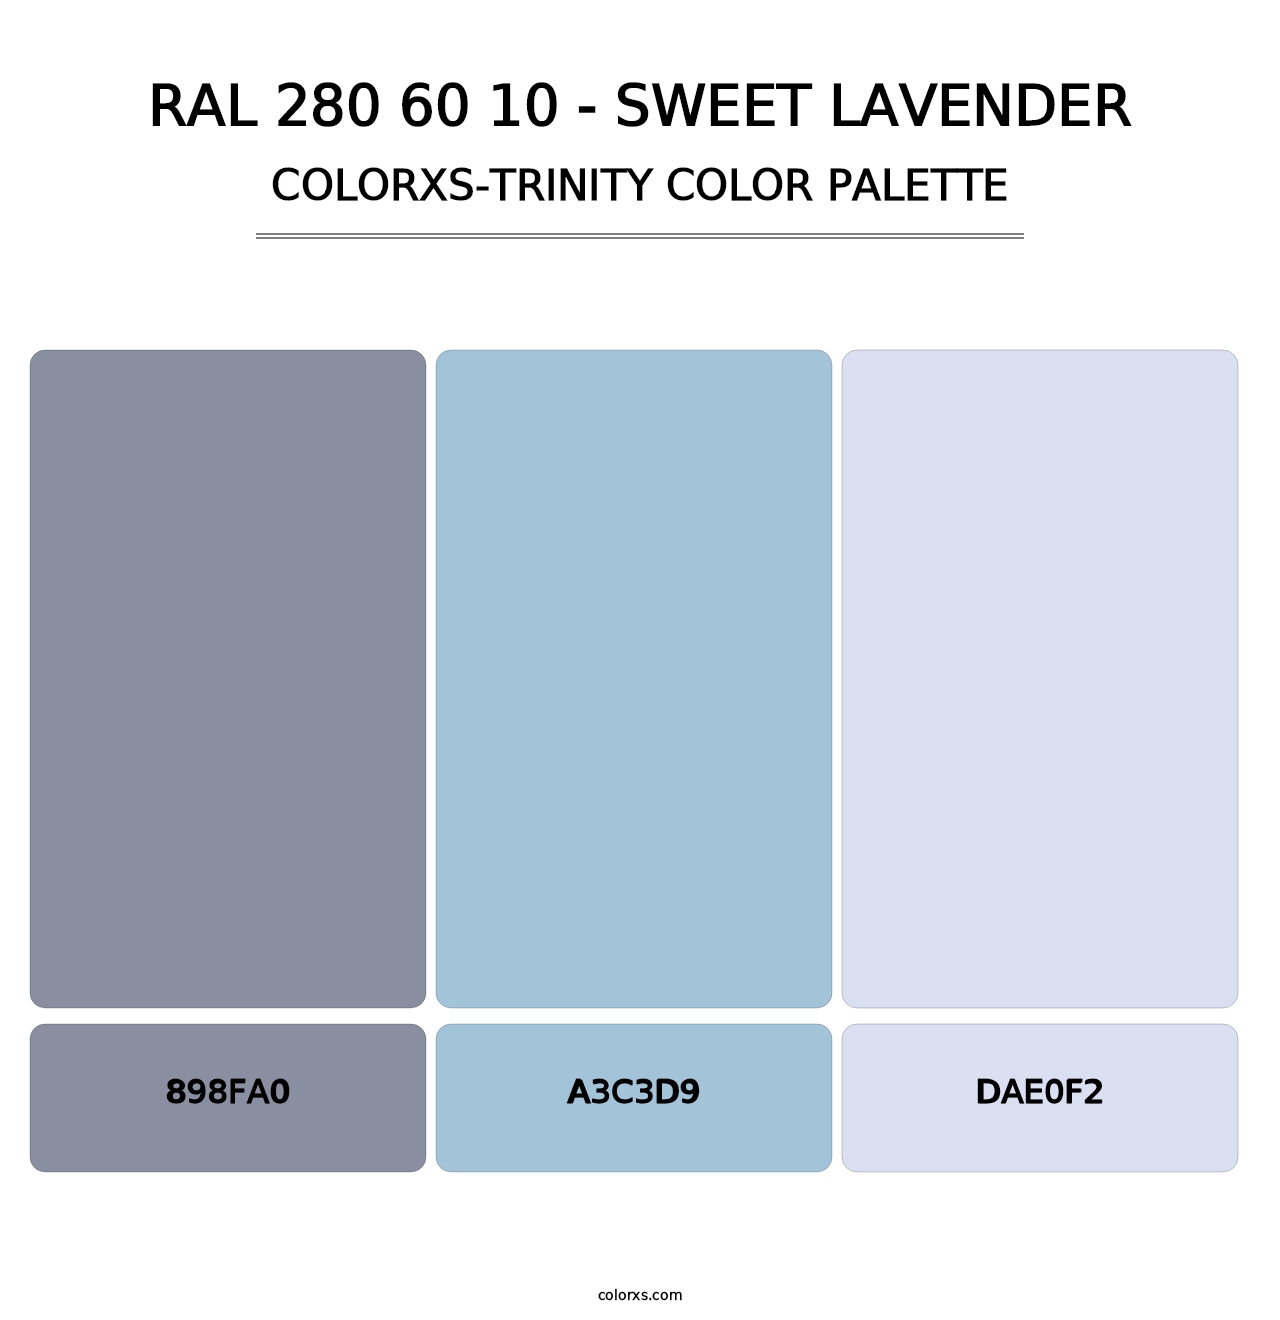 RAL 280 60 10 - Sweet Lavender - Colorxs Trinity Palette